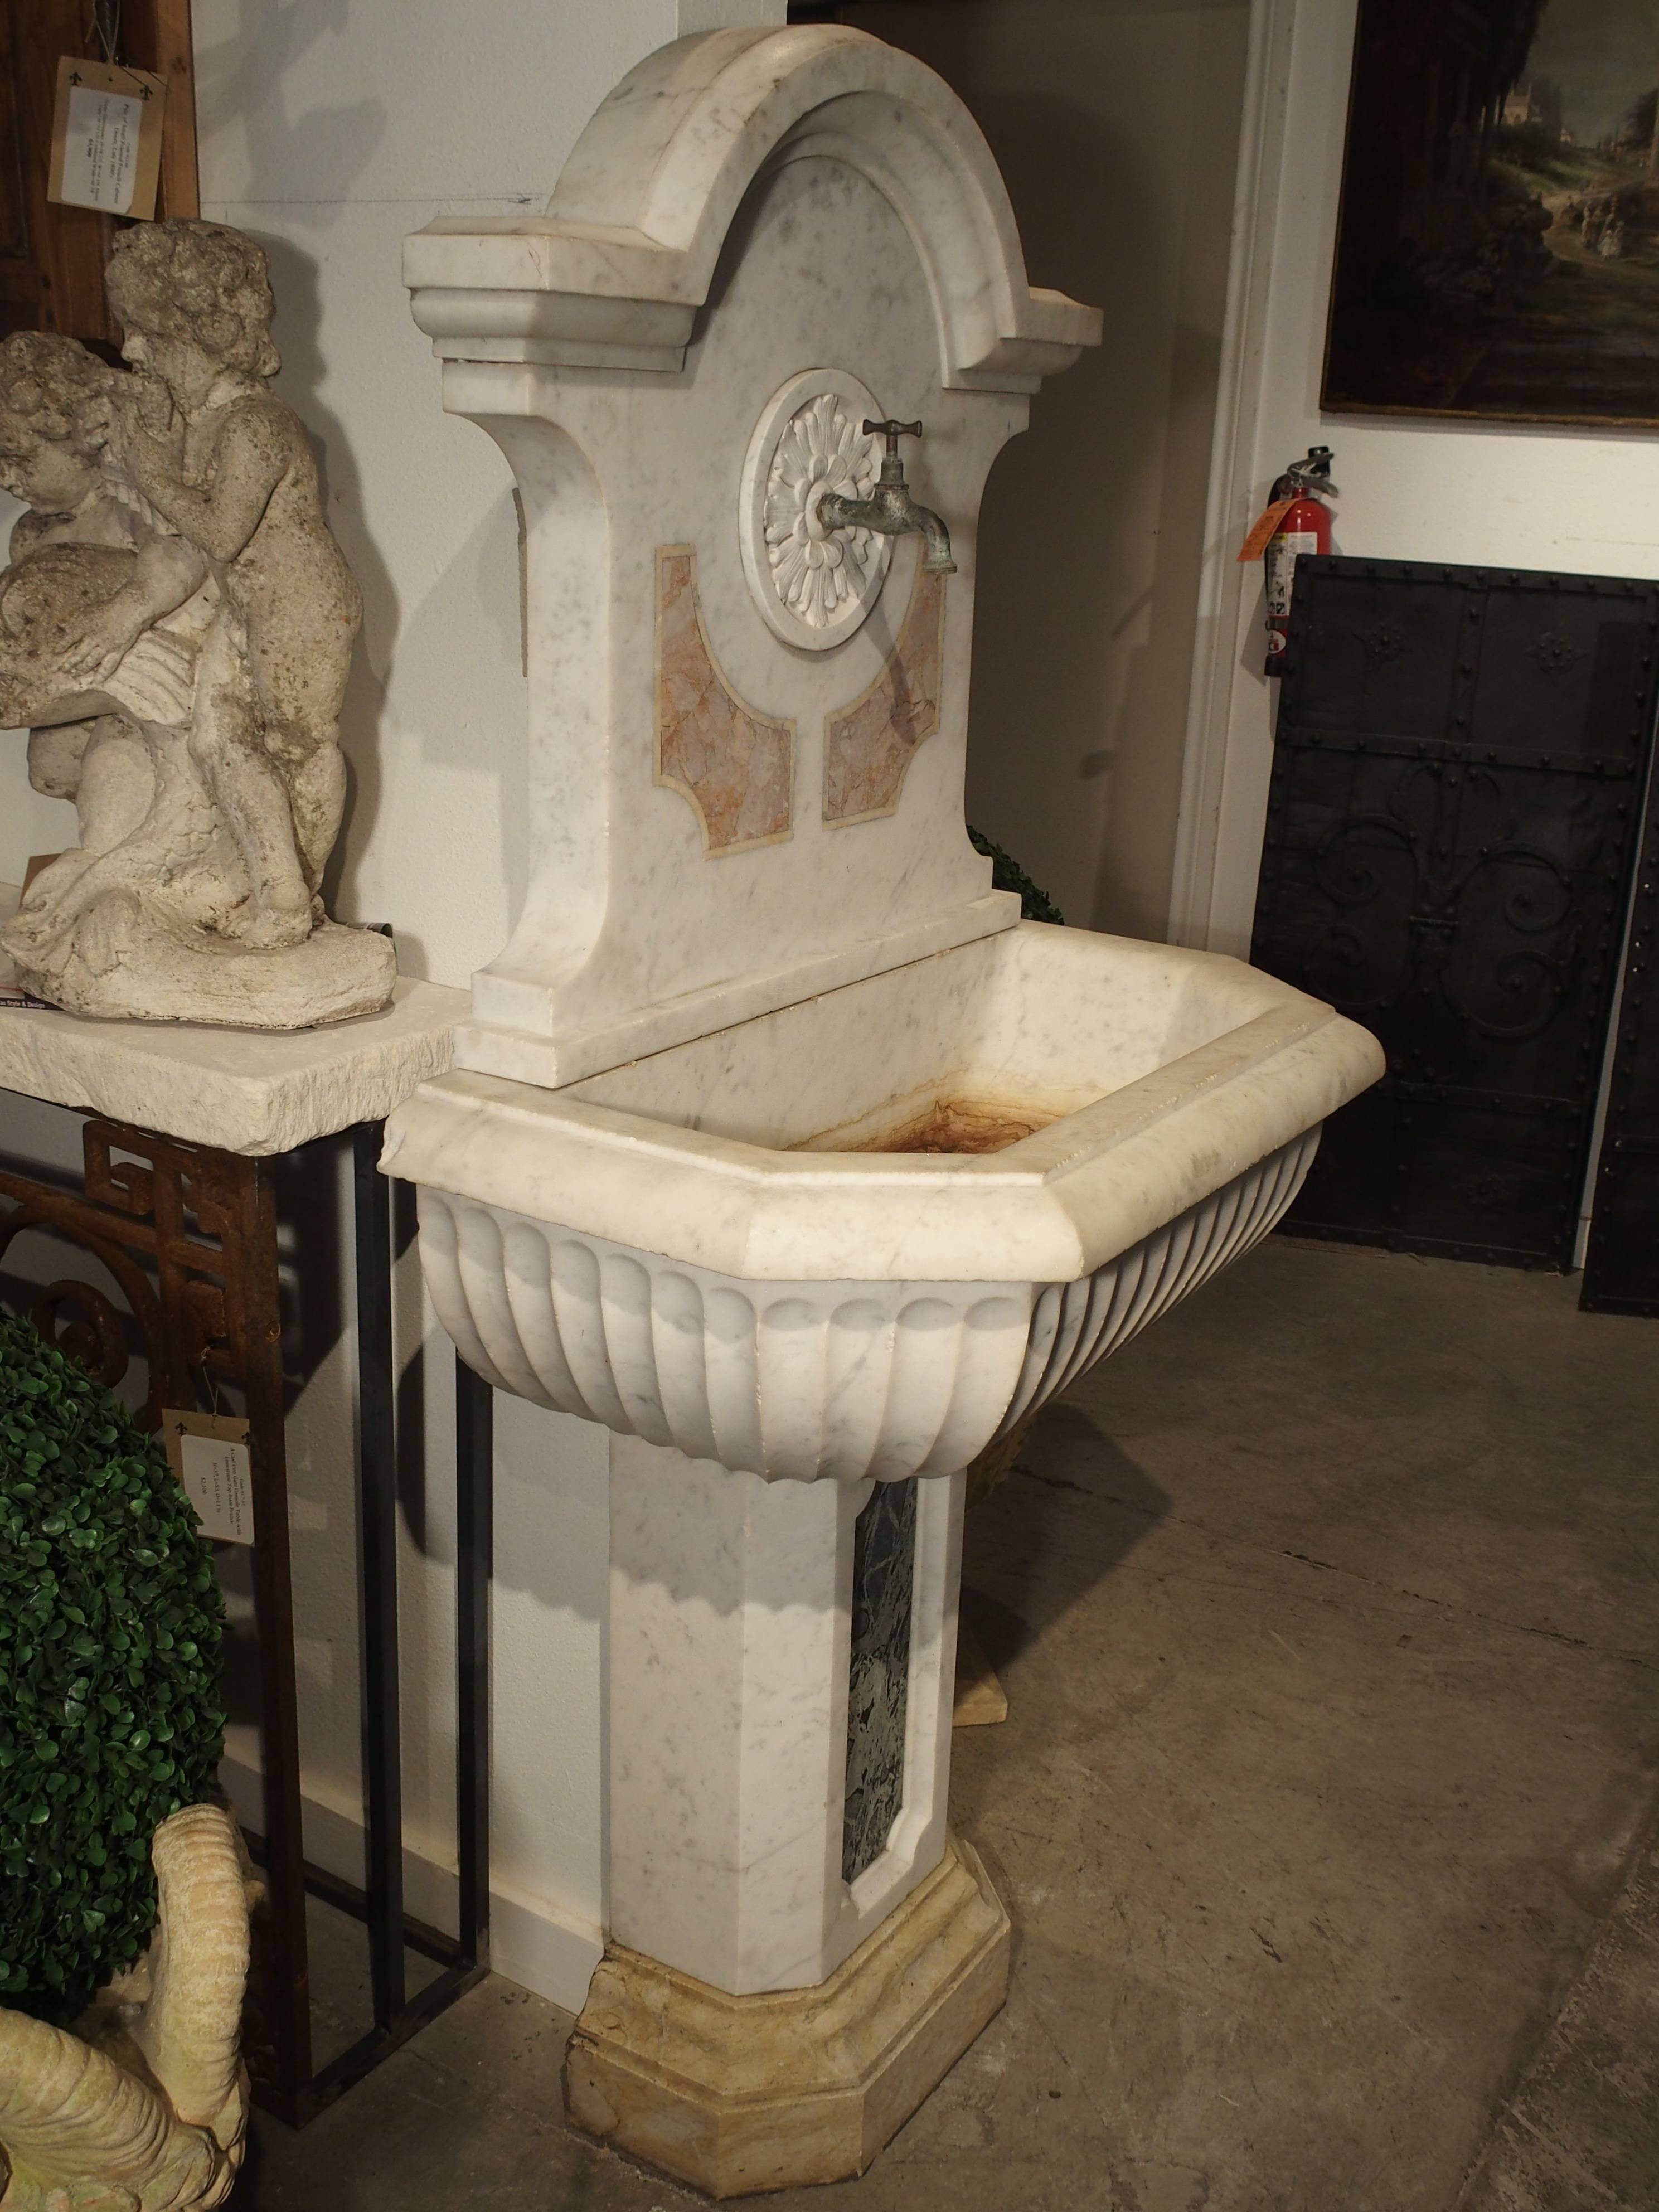 This elegant antique Carrera marble Italian wall fountain has an arched, stepped in top with right angles to the sides. Beneath this and on the back plate, there is a round circle filled with a stylized palmette and faucet for dispensing of the